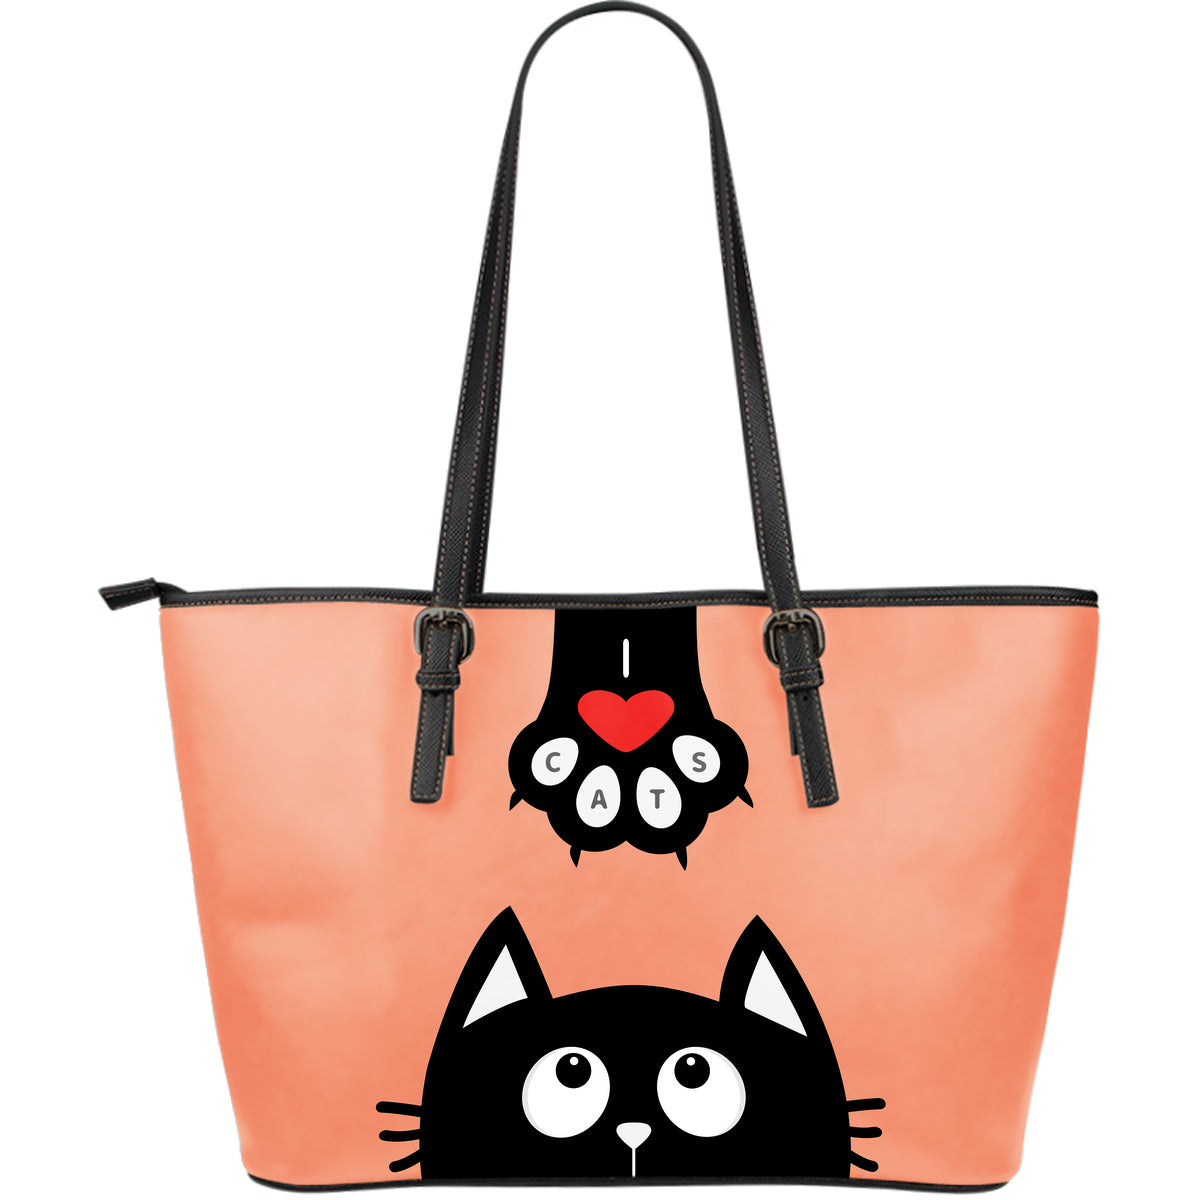 Hanging Cat Large Tote Bag - Hello Moa